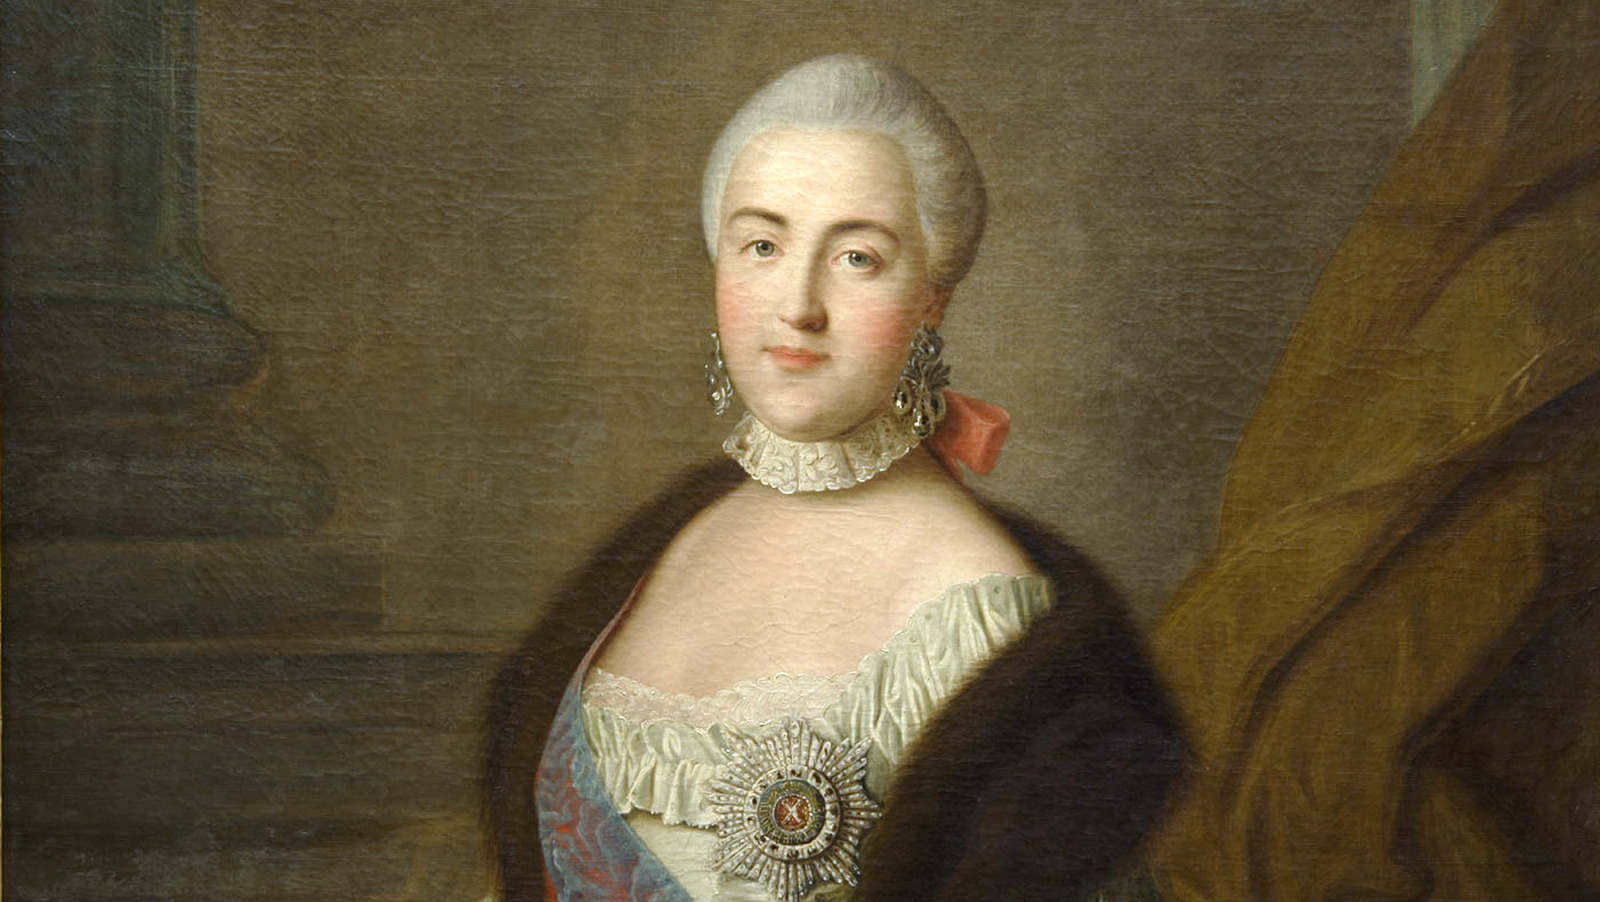 Catherine the Great: Biography, Accomplishments & Death